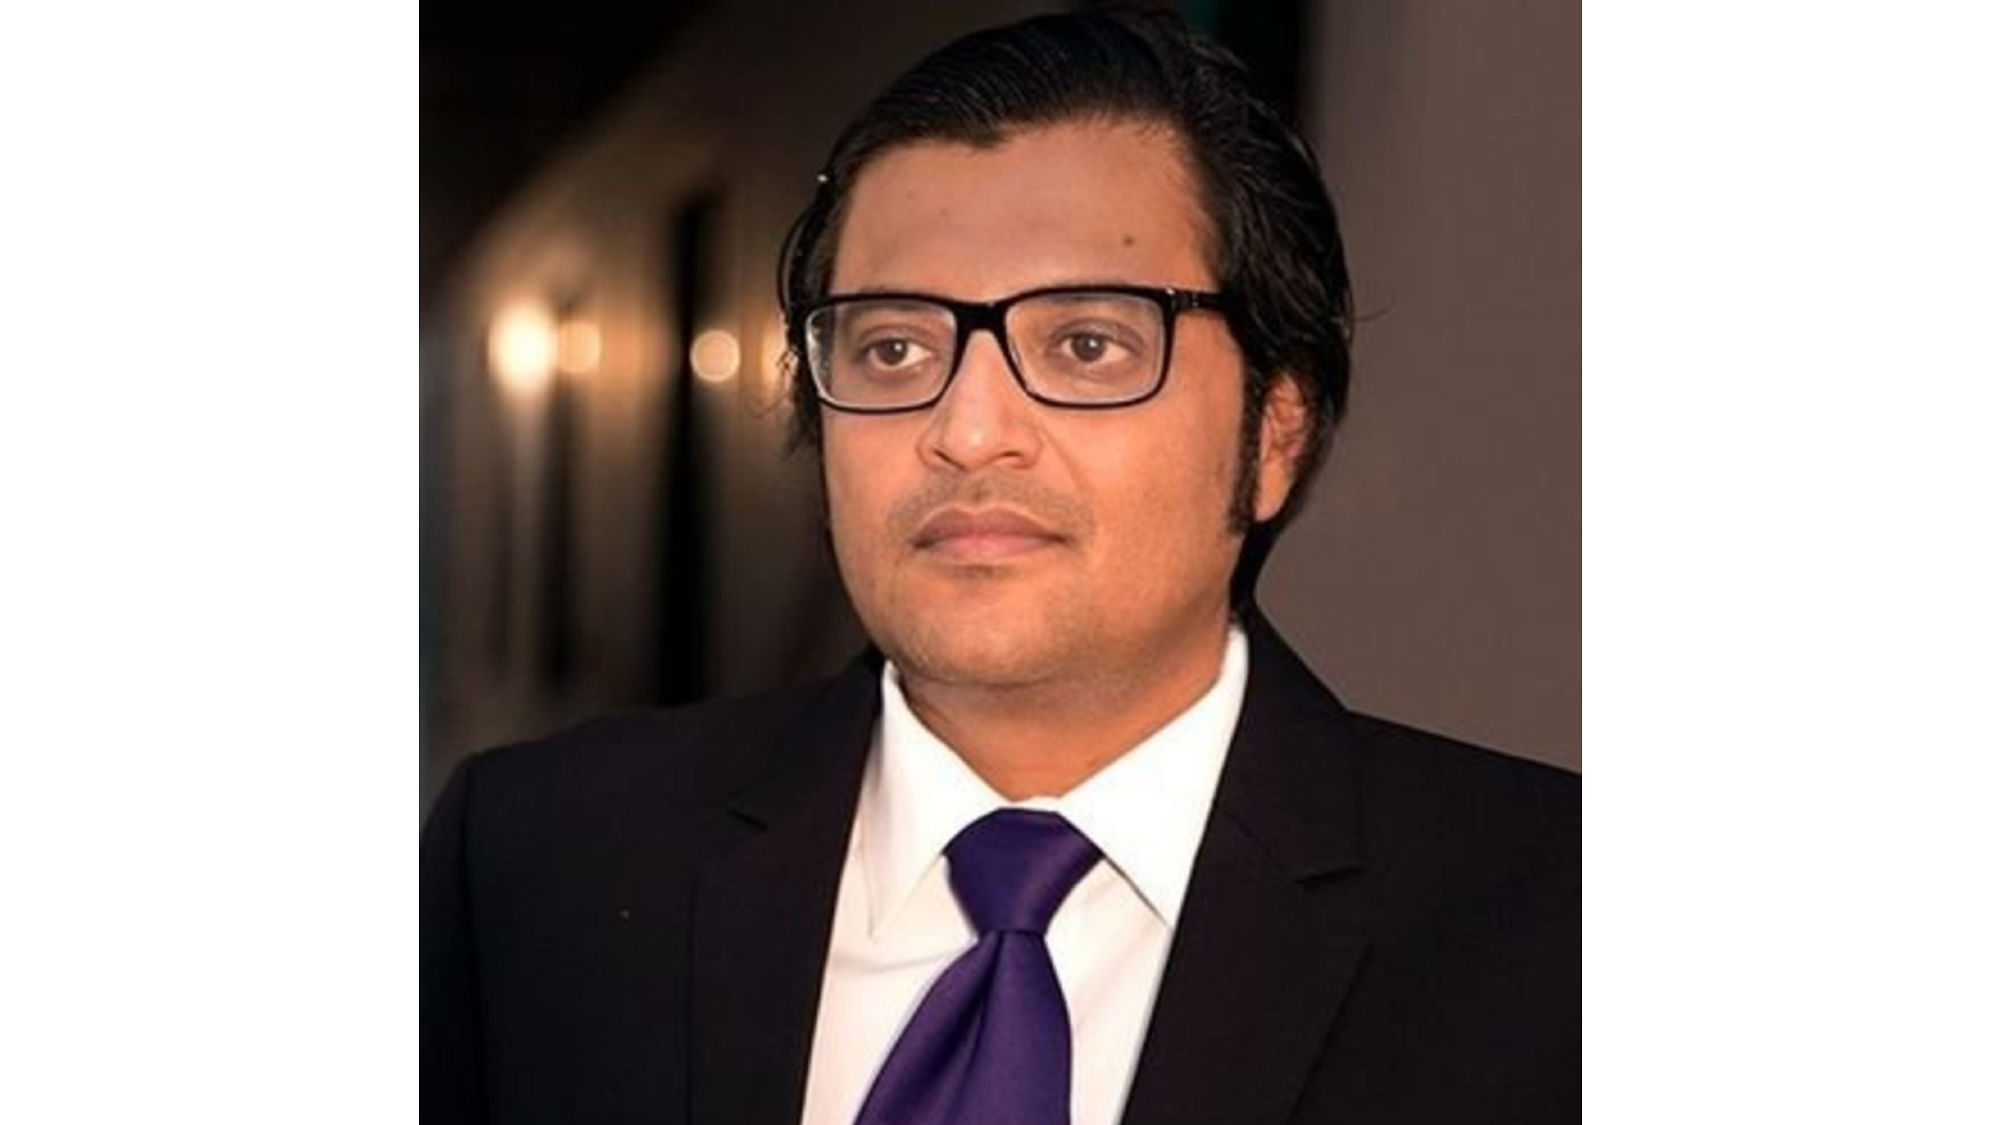 The top court had on April 24 granted protection against any coercive steps for three weeks to Arnab Goswami in connection with some FIRs lodged against him in various states. (Twitter Image/@ArnabGoswamiRTv)